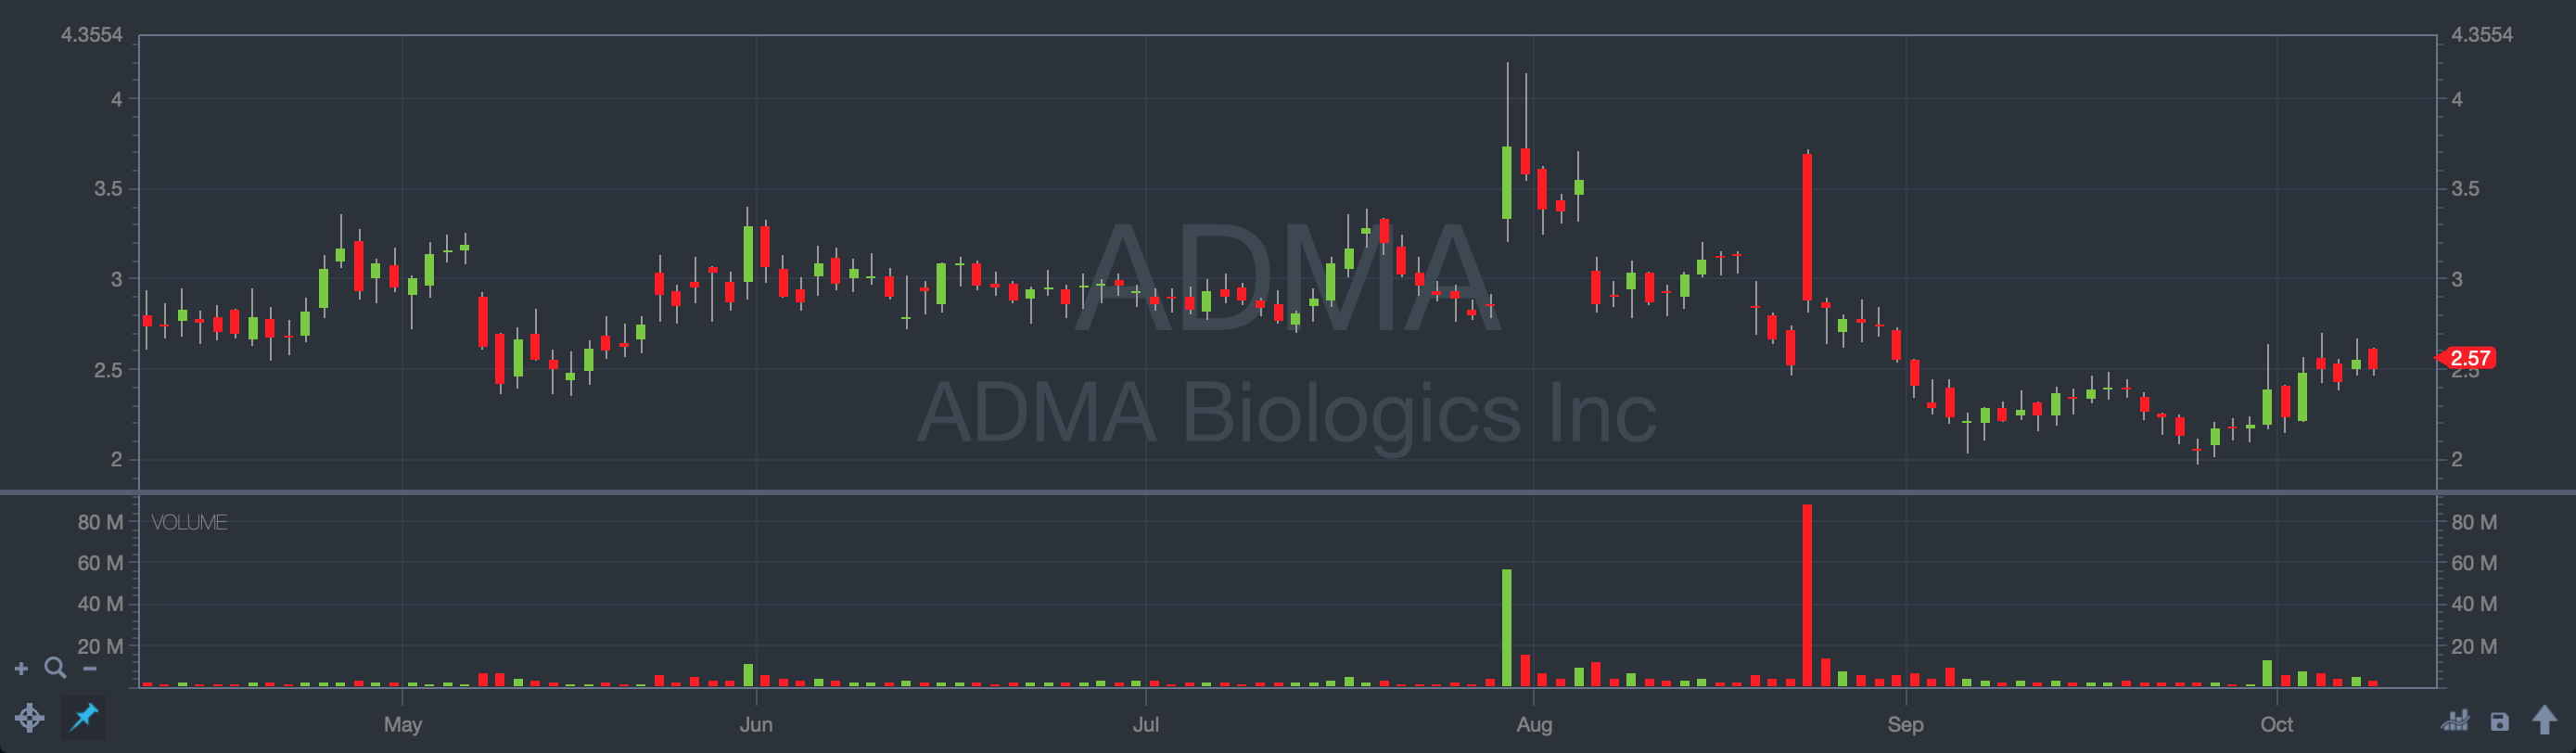 most successful penny stocks in history adma